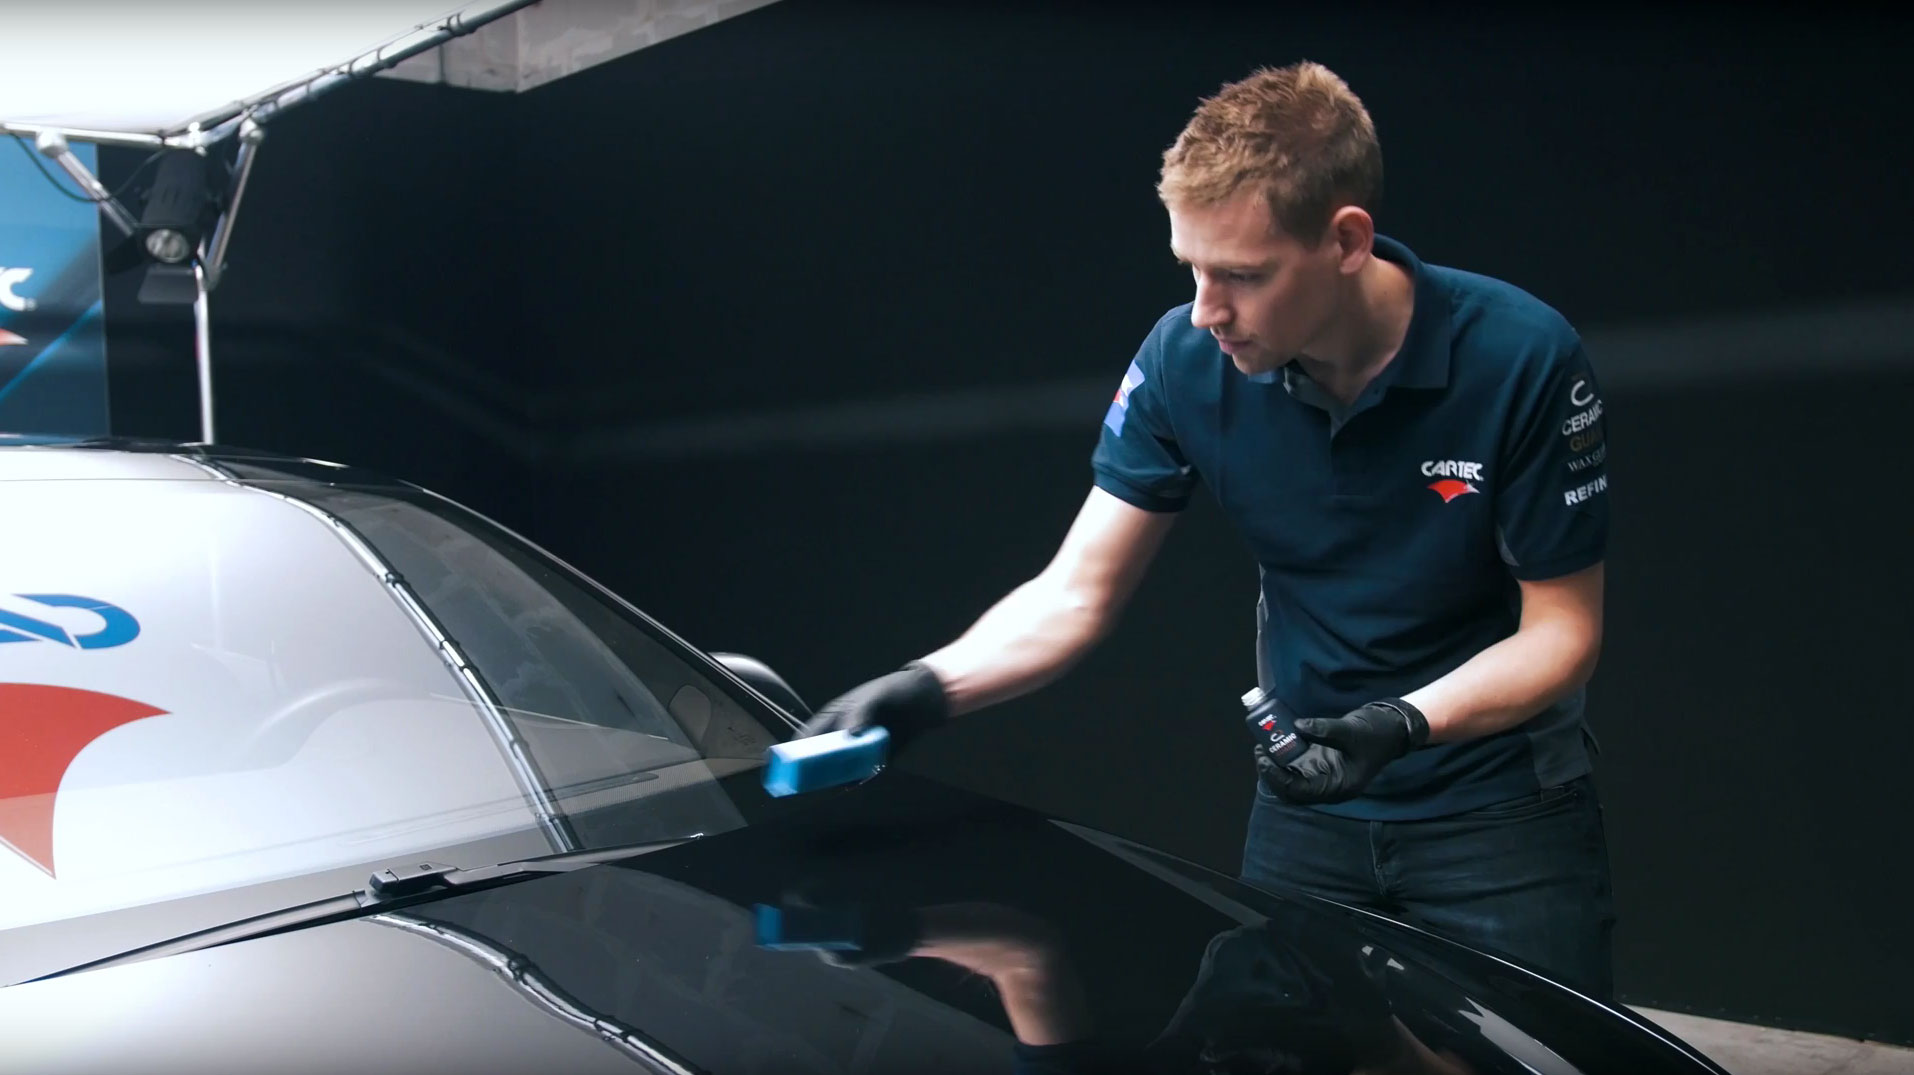 Everything you need to know about a car wash (part 1) - Cartec World